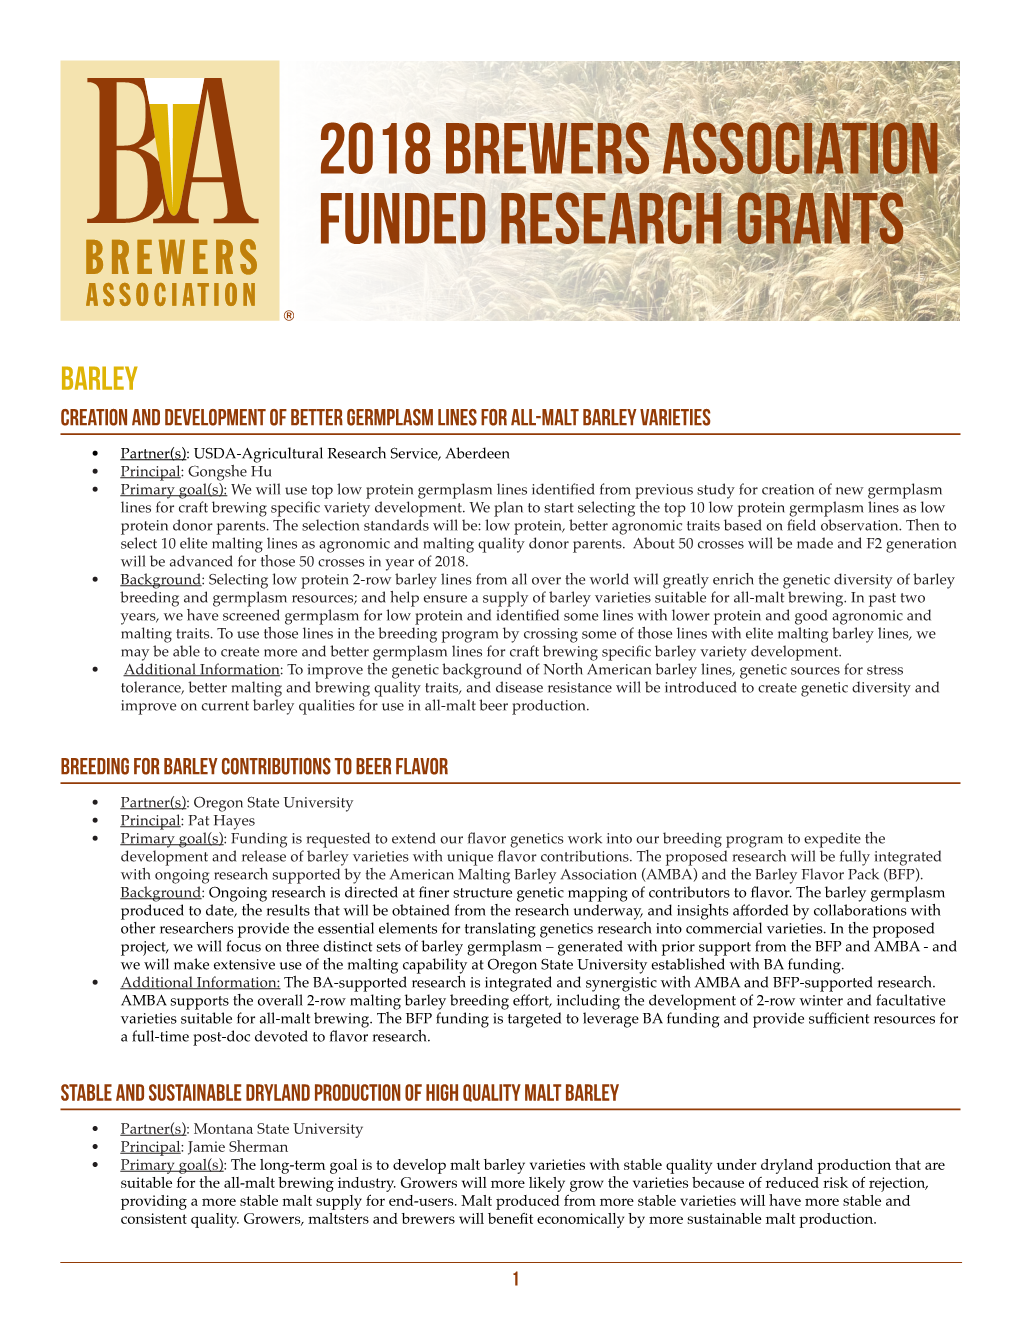 2018 Brewers Association Funded Research Grants